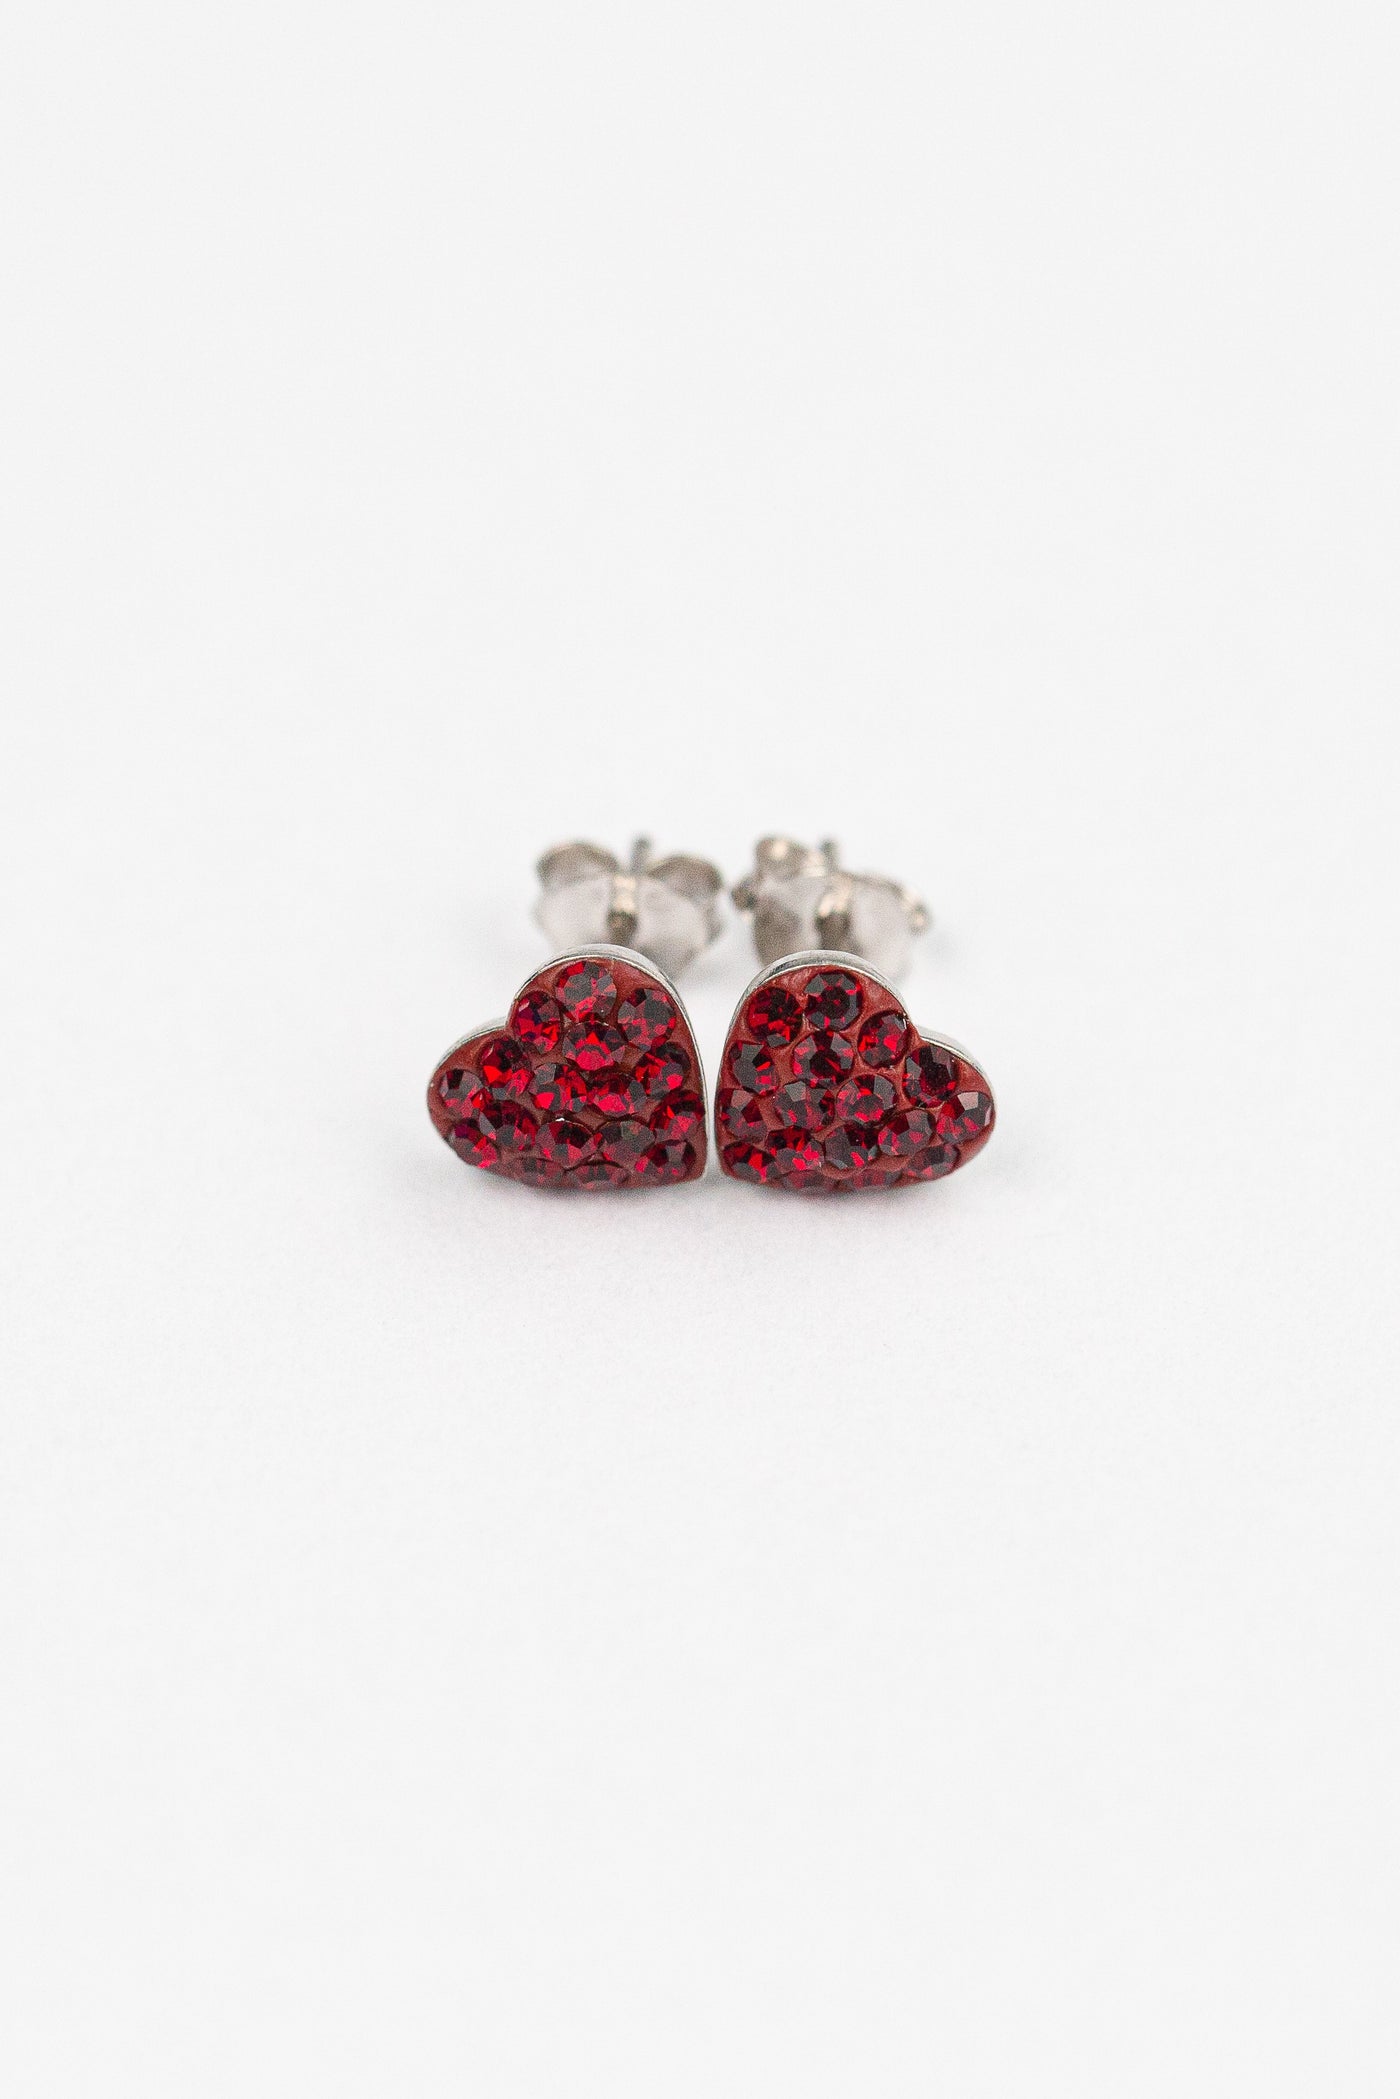 Heart Pave Crystal Silver Stud Earrings in Dark Siam Red | Annie and Sisters | sister stud earrings, for kids, children's jewelry, kid's jewelry, best friend